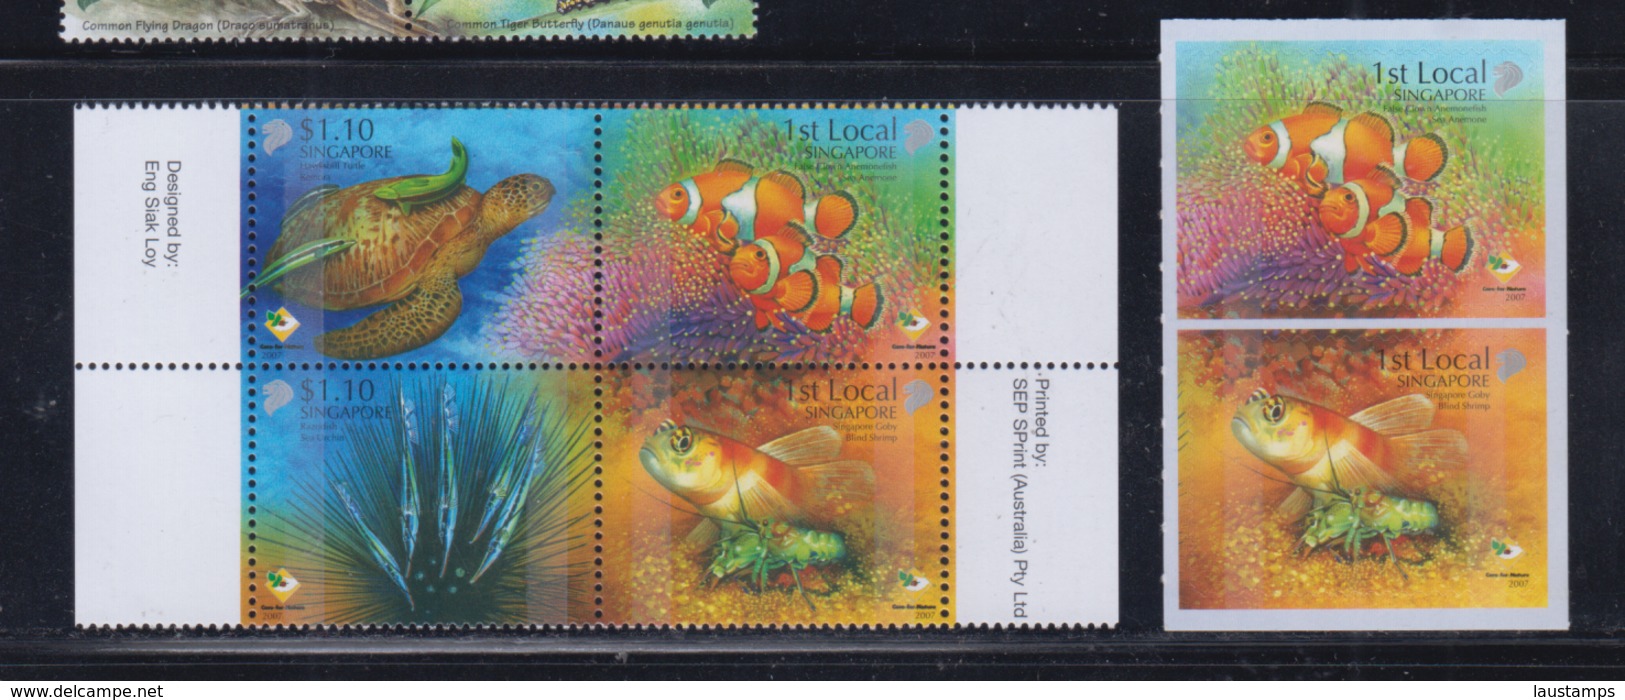 Singapore 2007 Shores And Reefs, Turtle, Fishes Care For Nature Block + Booklet Stamp MNH - Singapore (1959-...)